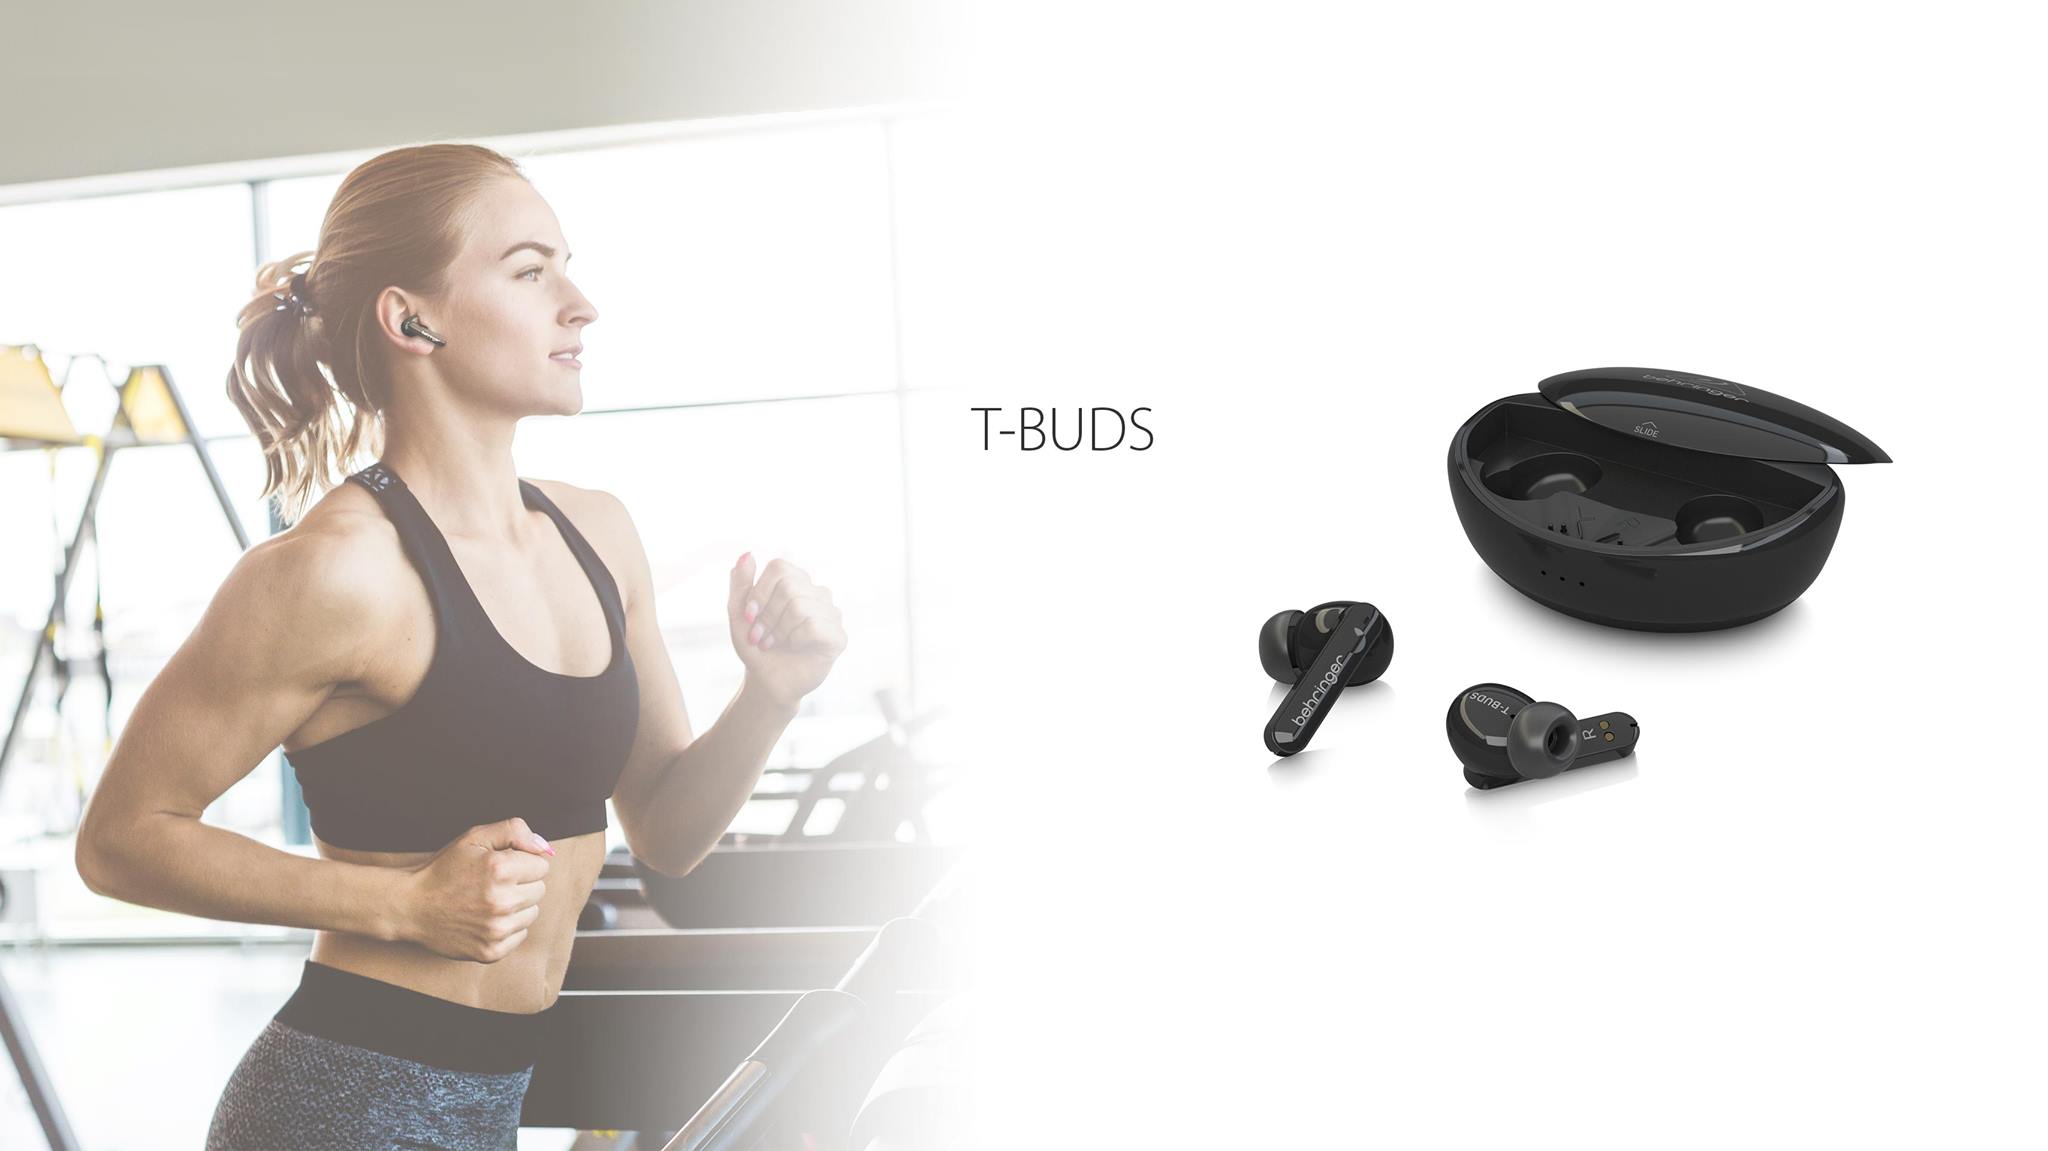 Behringer T-BUDS are a pair of $39 active noise cancelling true wireless earbuds